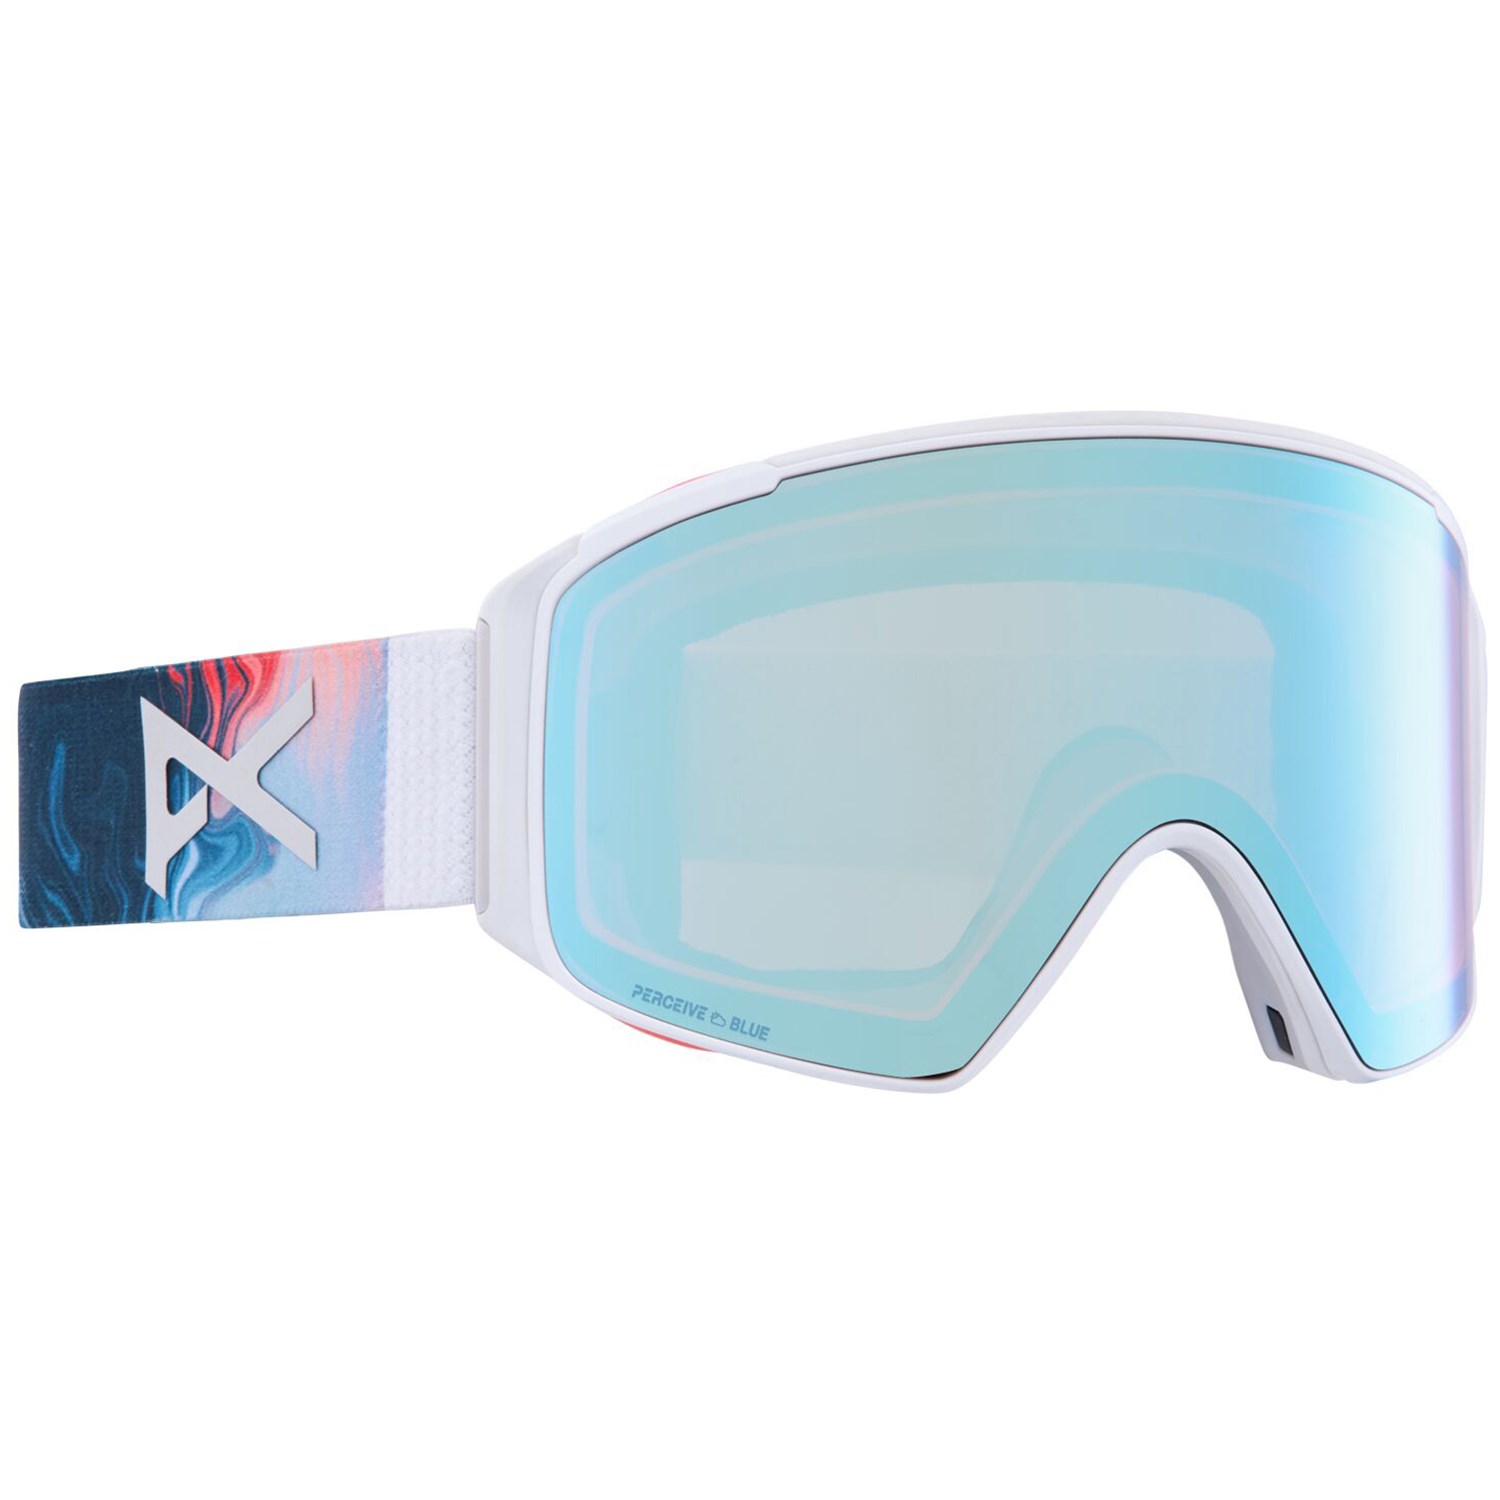 Anon M4S Cylindrical Low Bridge Fit Goggles | evo Canada